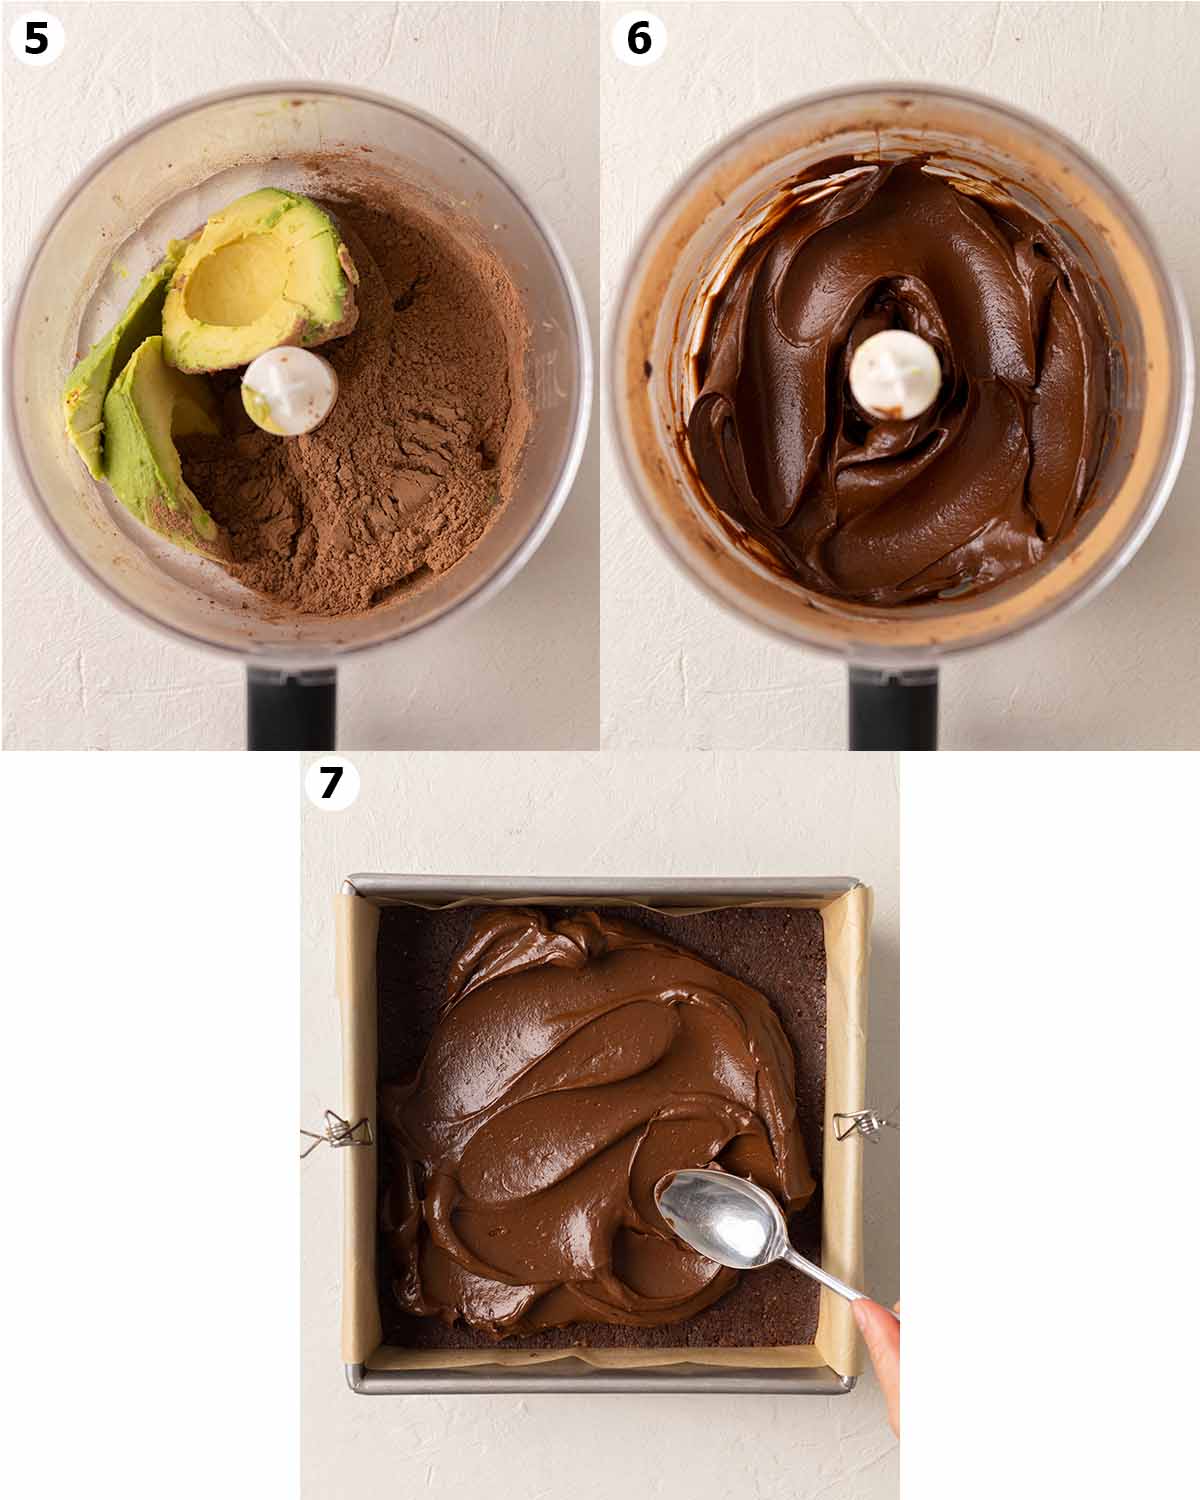 Three image collage showing how to make the chocolate frosting and spreading it on the brownies.